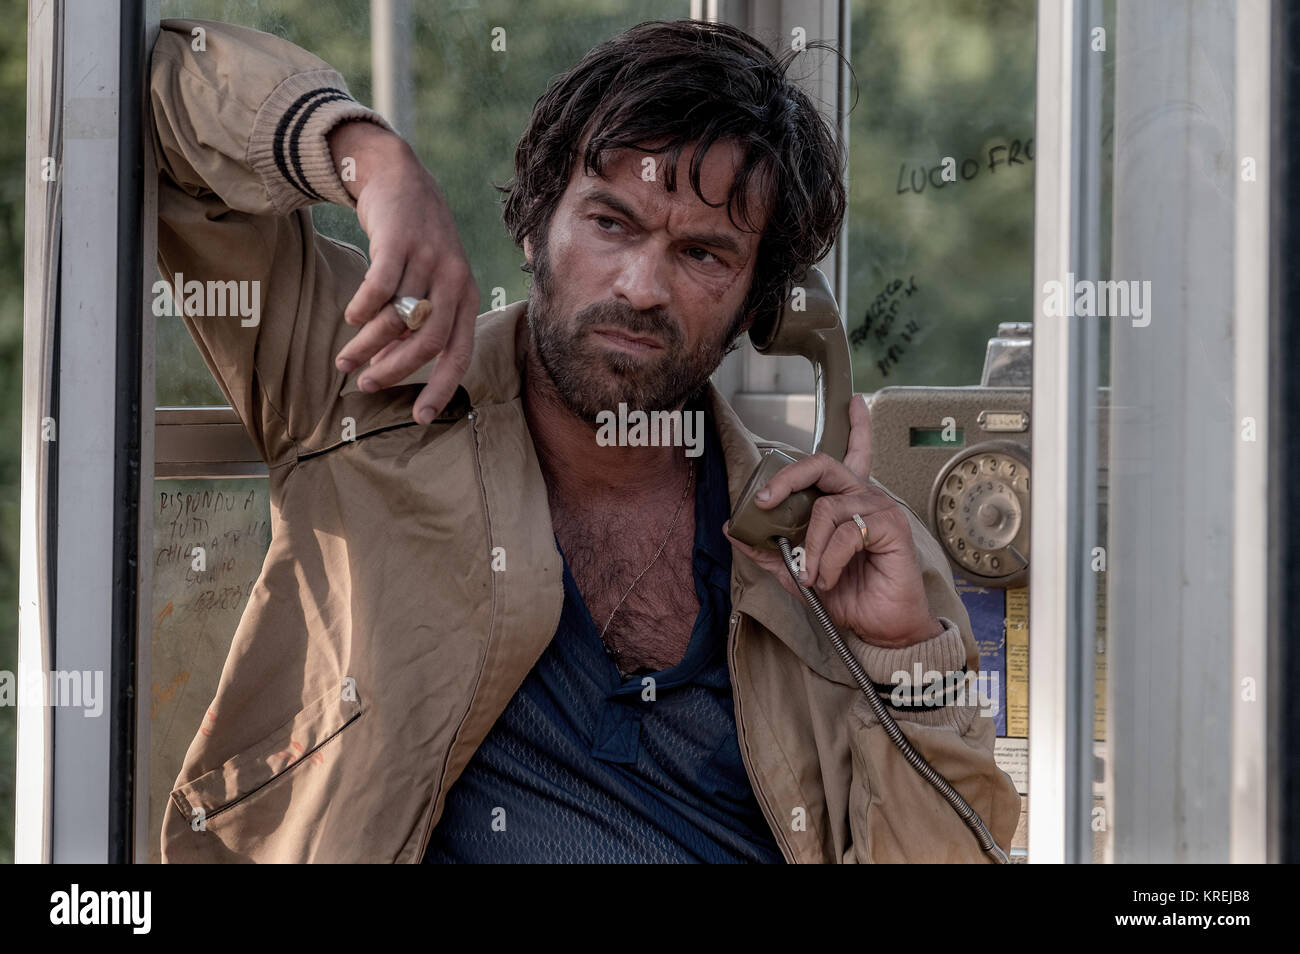 RELEASE DATE: December 8, 2017 TITLE: All The Money In The World STUDIO: TriStar Productions DIRECTOR: Ridley Scott PLOT: A left-wing paramilitary organization in Italy hatches a massive kidnapping plot in the 1970s. STARRING: ROMAIN DURIS as Cinquanta. (Credit Image: © TriStar Productions/Entertainment Pictures/ZUMAPRESS) Stock Photo